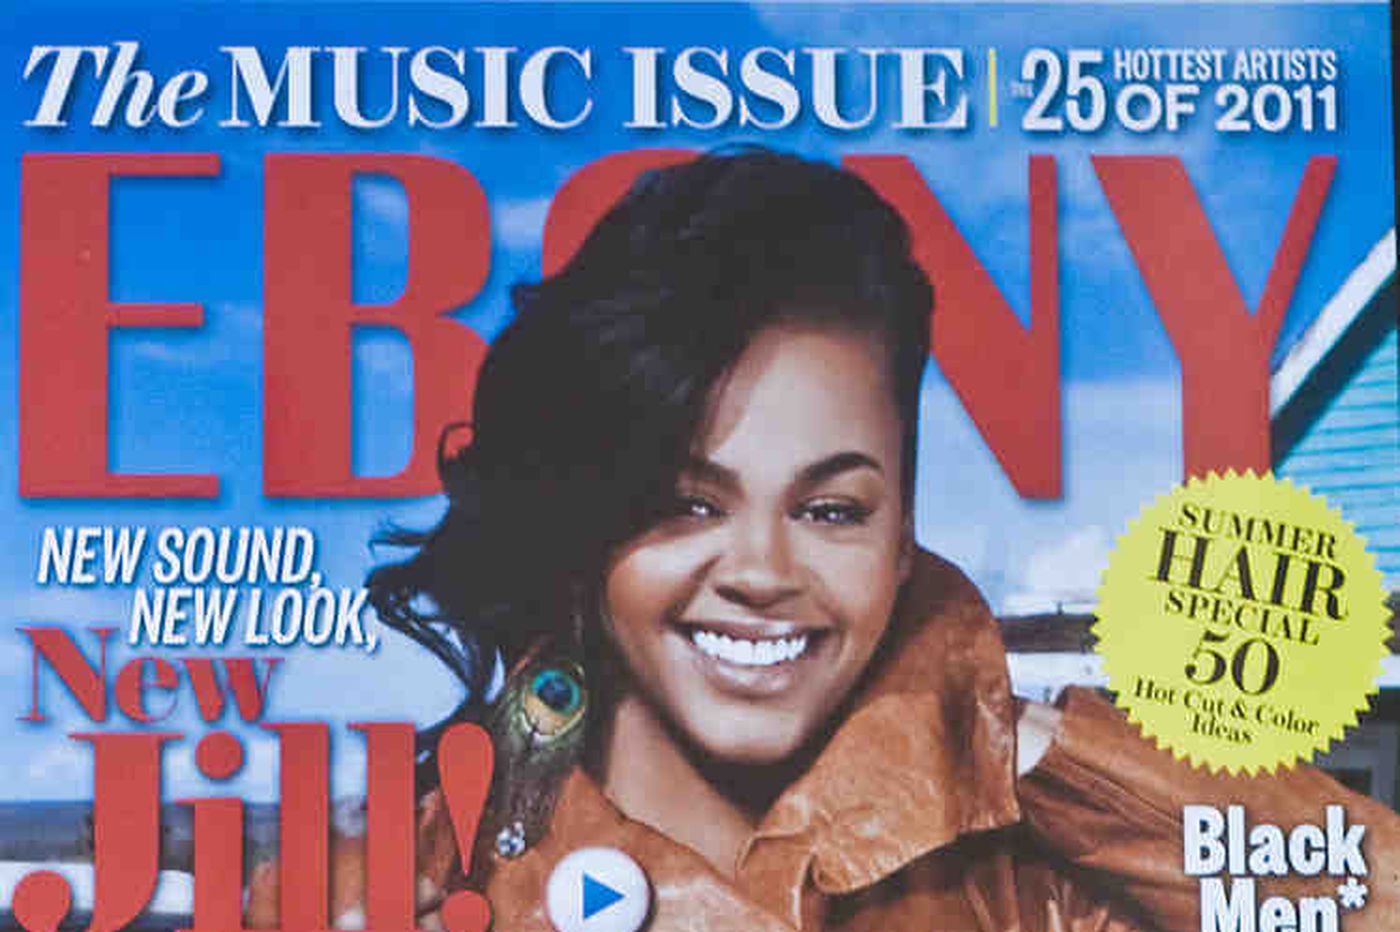 Publisher that introduced iconic black magazines Jet and Ebony files for bankruptcy